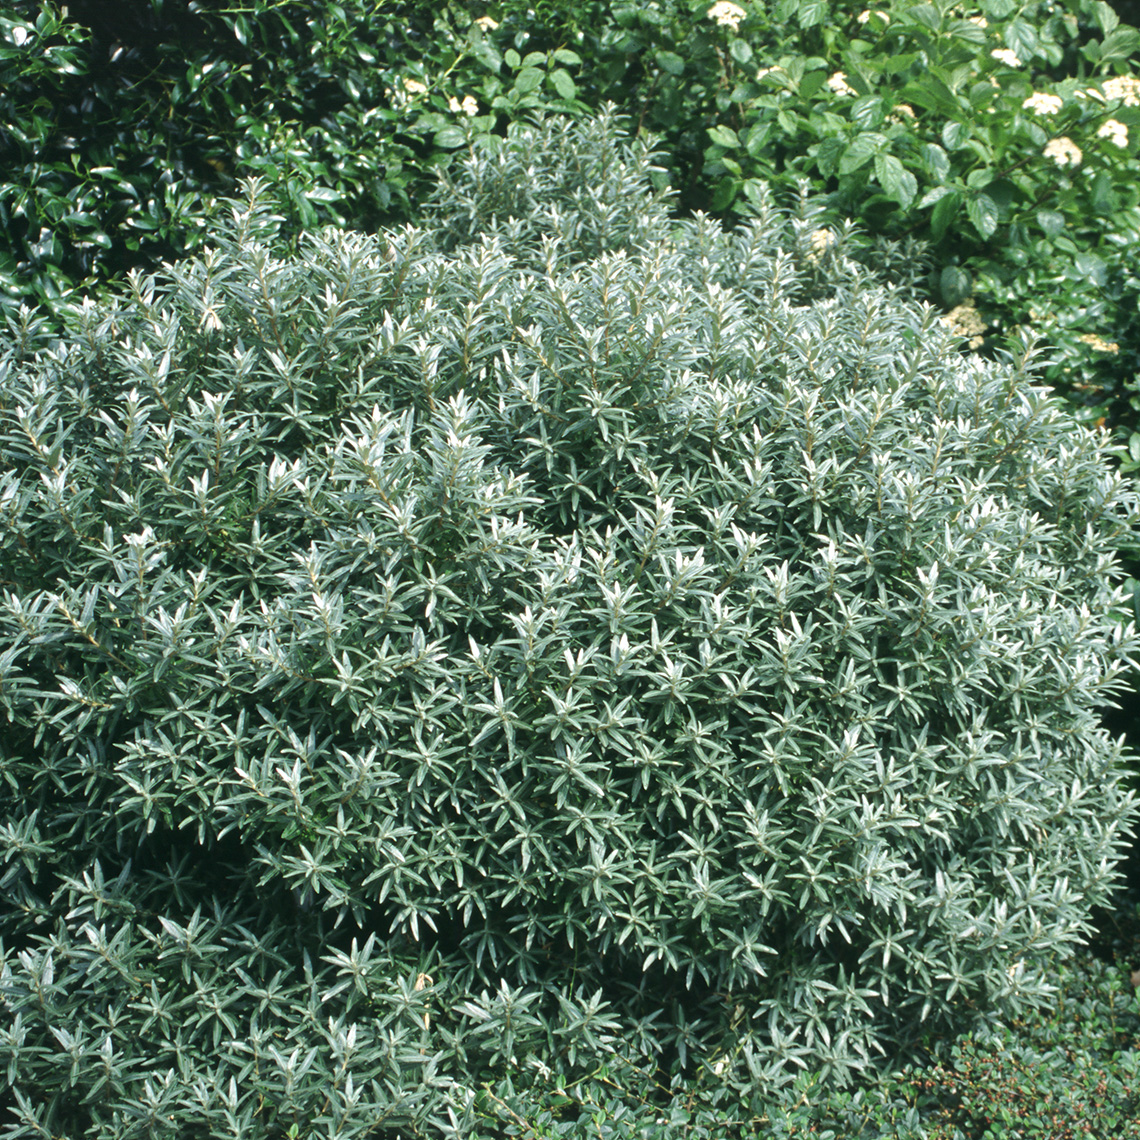 Silver foliaged Sprite sea buckthorn in a landscape showing its unique rounded dwarf habit